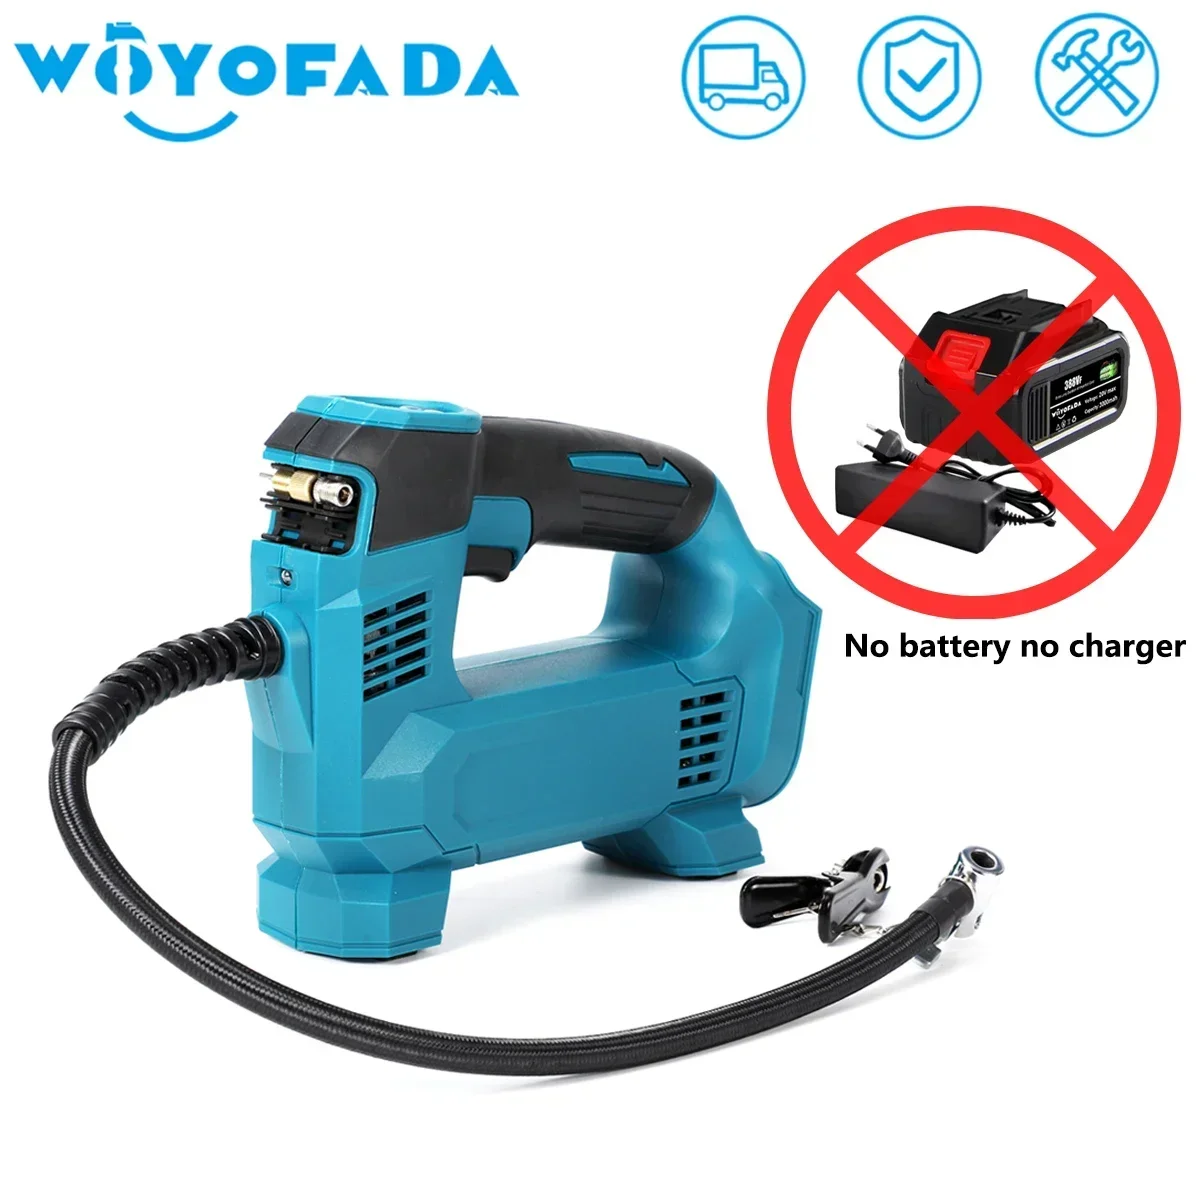 WOYOFADA Cordless Portable Electric Air Pump Car Tire Inflator Air Compressor For Car Bicycle Tires Balls For Makita 18V Battery gogobest gf750 plus electric retro bike 20 4 0 inch fat tires 1000w 2 motor 50km h max speed 48v 17 5ah battery front and rear hydraulic brakes shimano 7 speed gears green